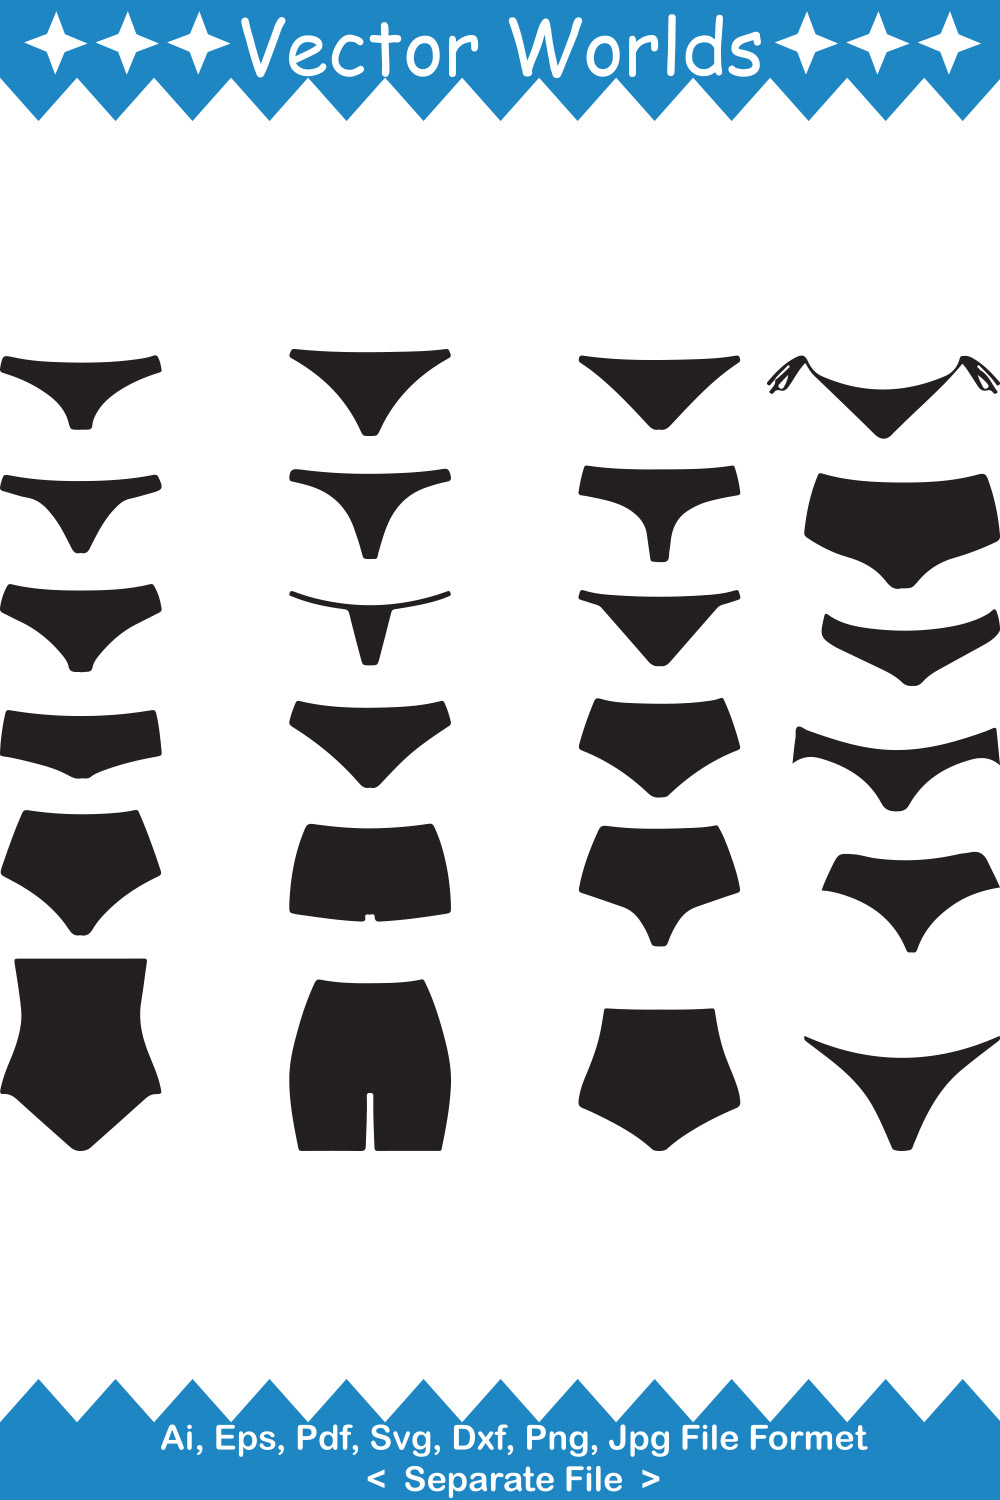 Compilation of vector irresistible panty silhouette images.